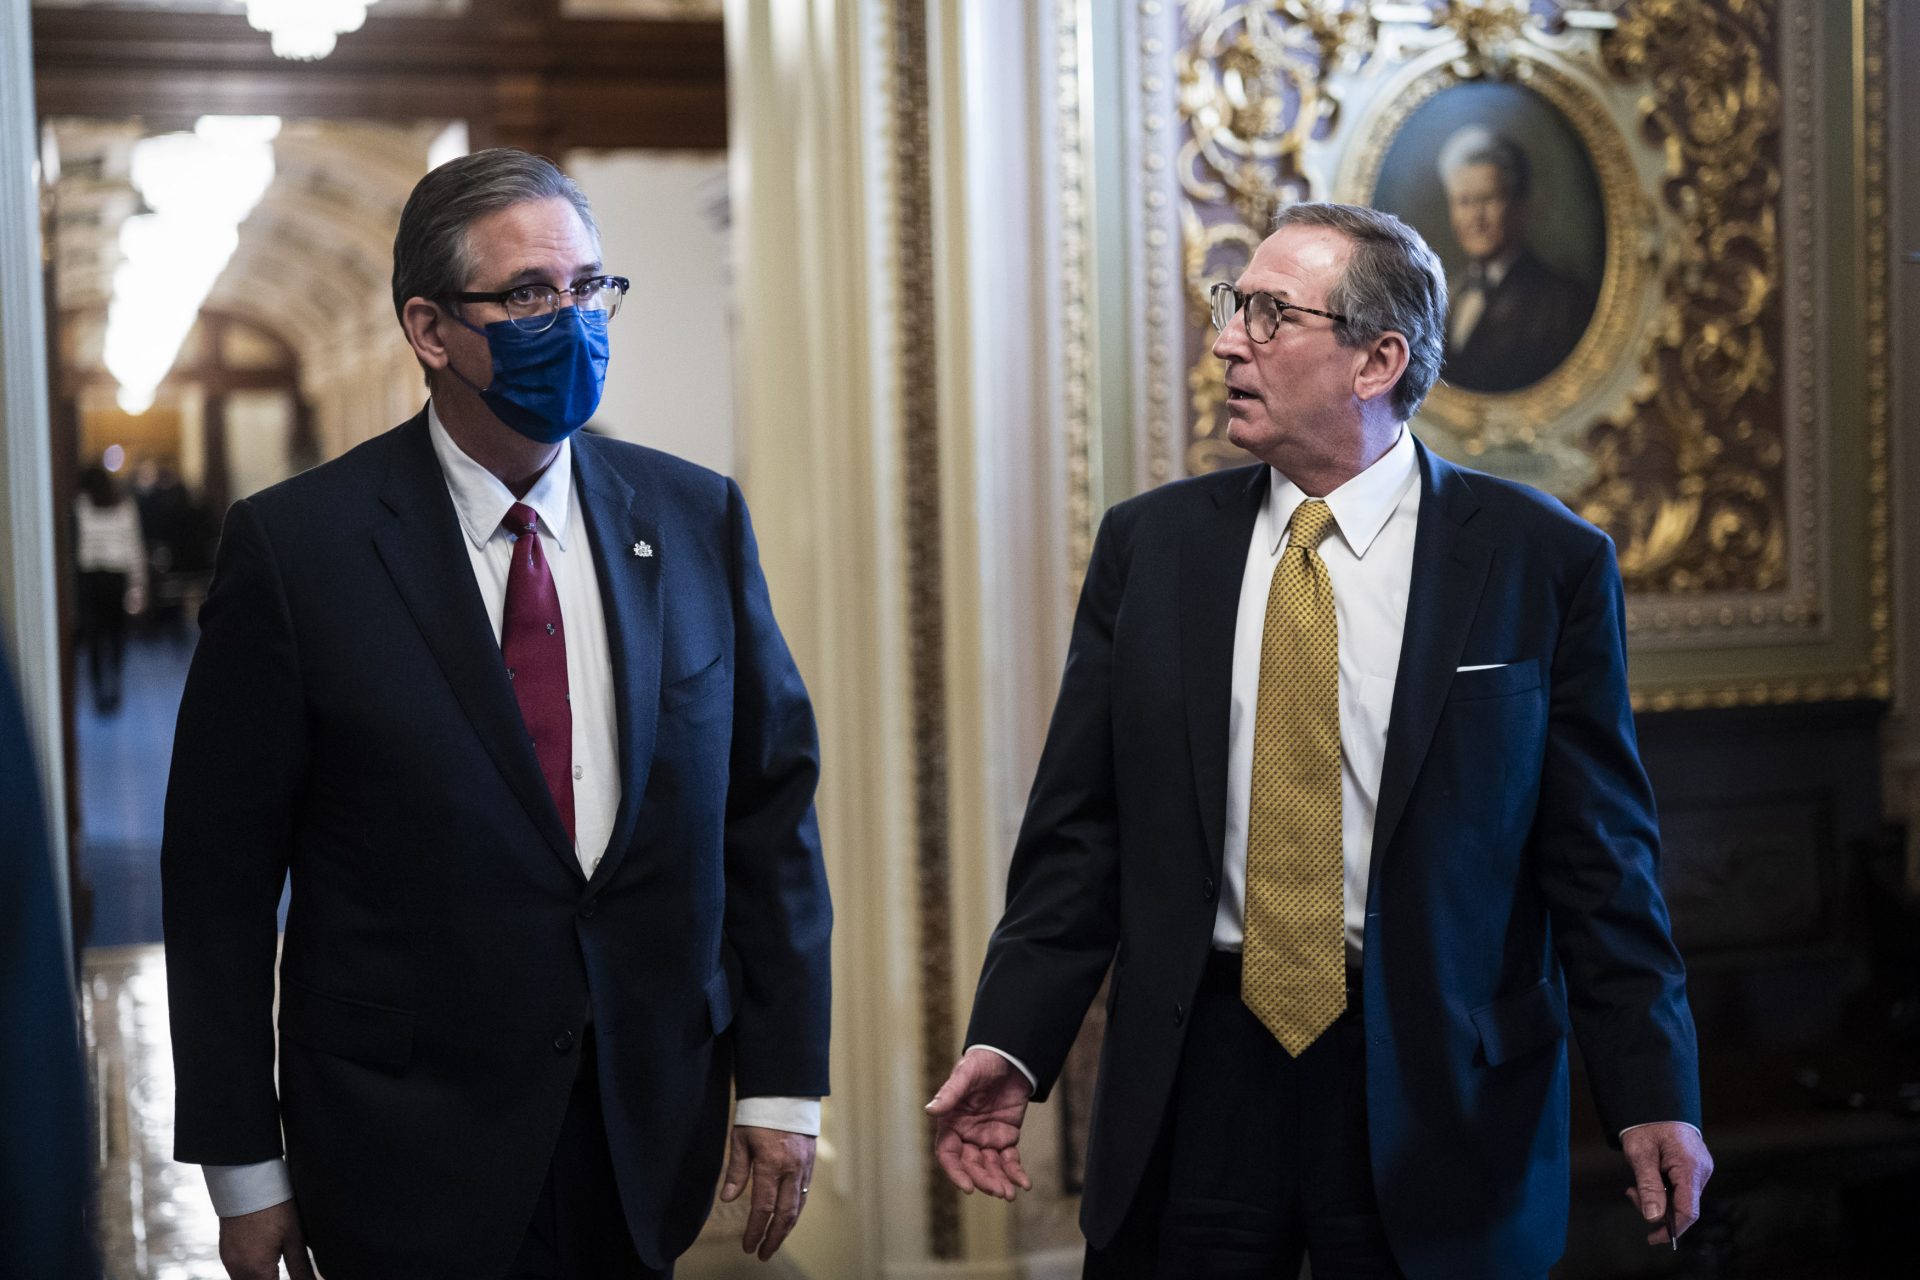 Bruce Castor and Michael van der Veen, lawyers for former President Donald Trump, walk back to their meeting room during a break through the Senate Reception room in the Capitol on the fourth day of the Senate Impeachment trials for former President Donald Trump on Capitol Hill, Friday, Feb 12, 2021 in Washington.